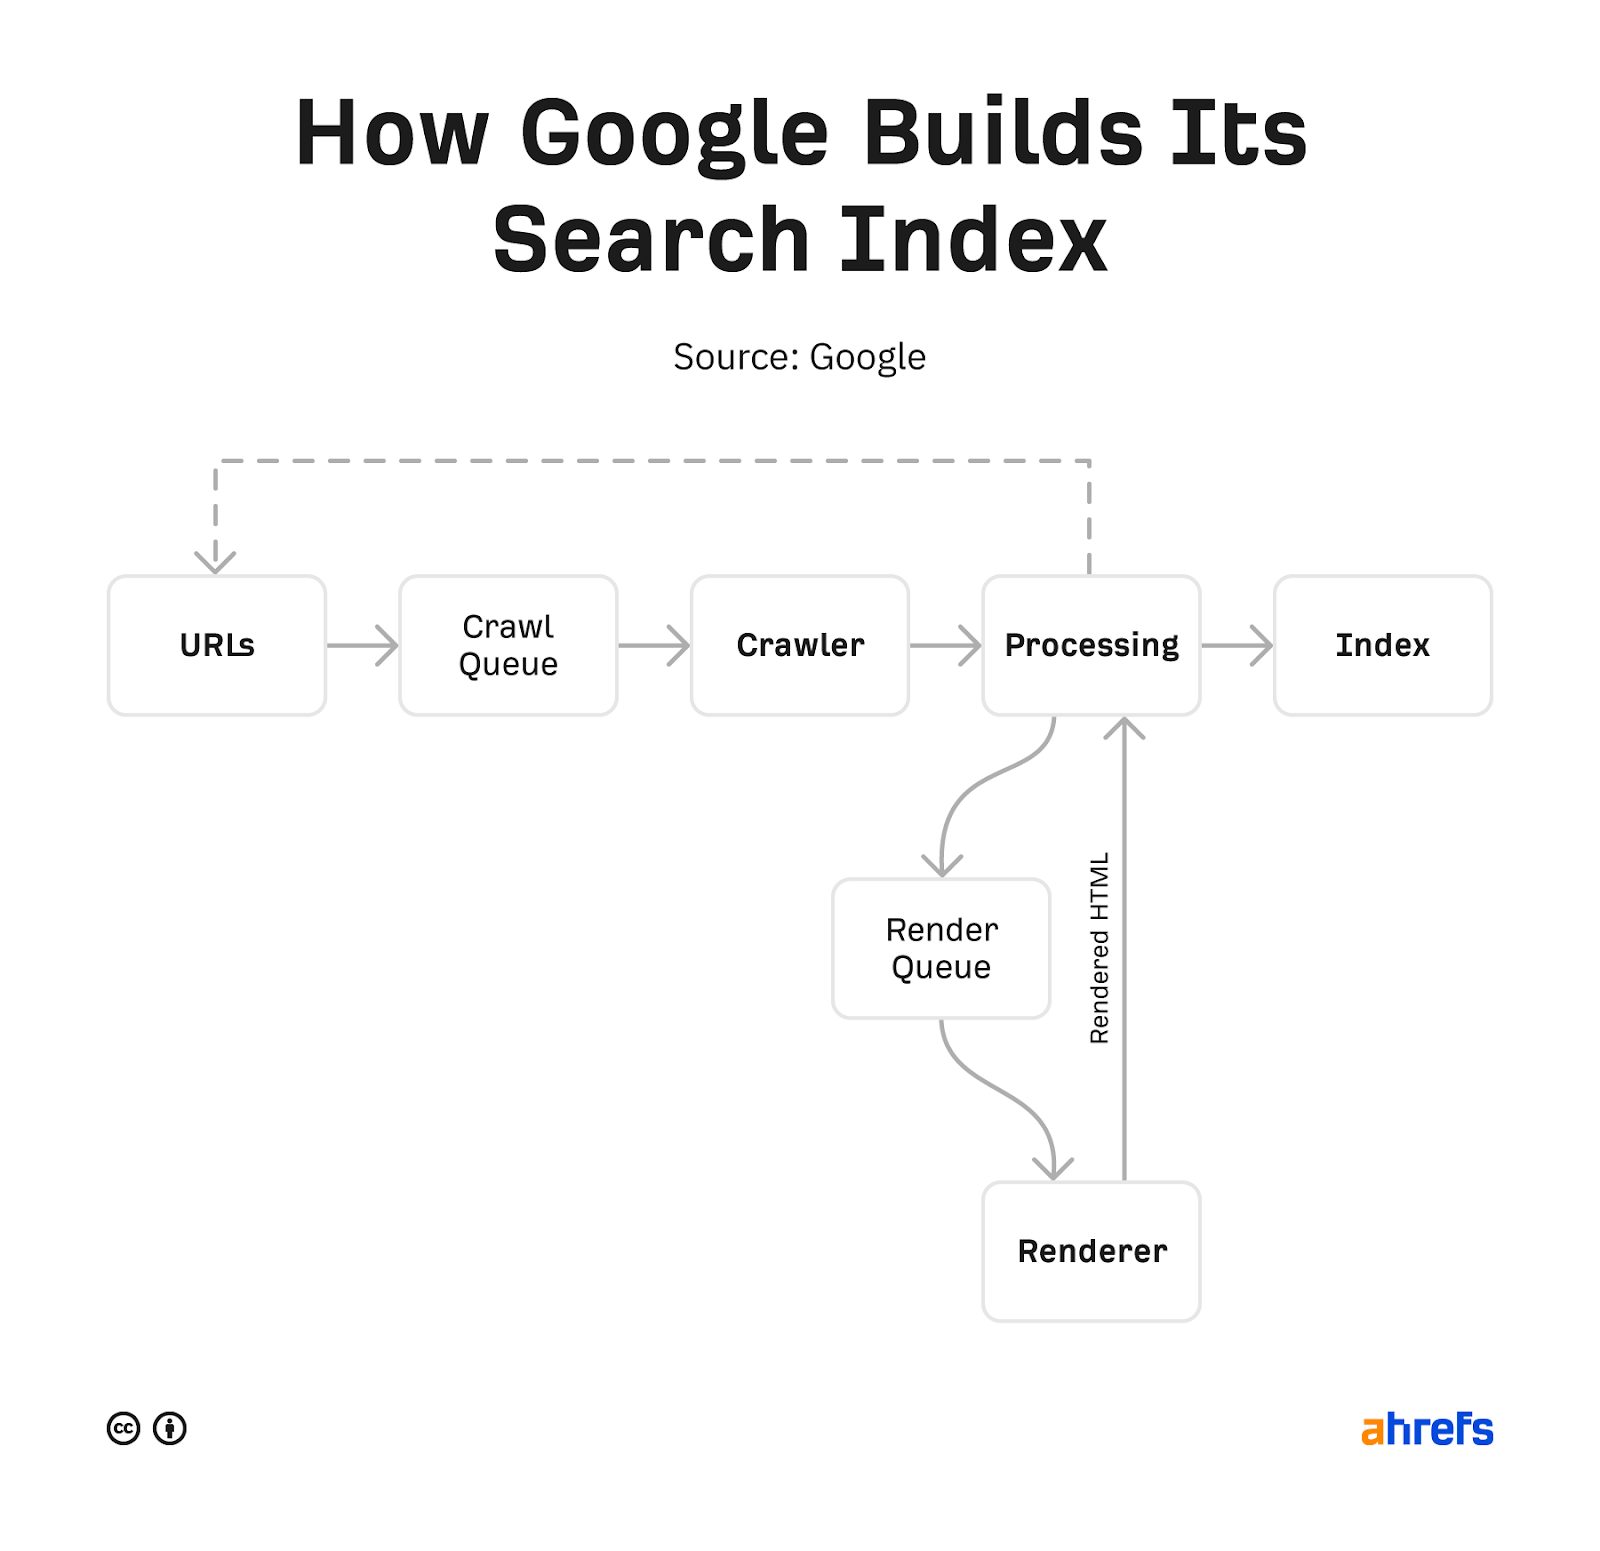 Flowchart showing how Google builds its search index